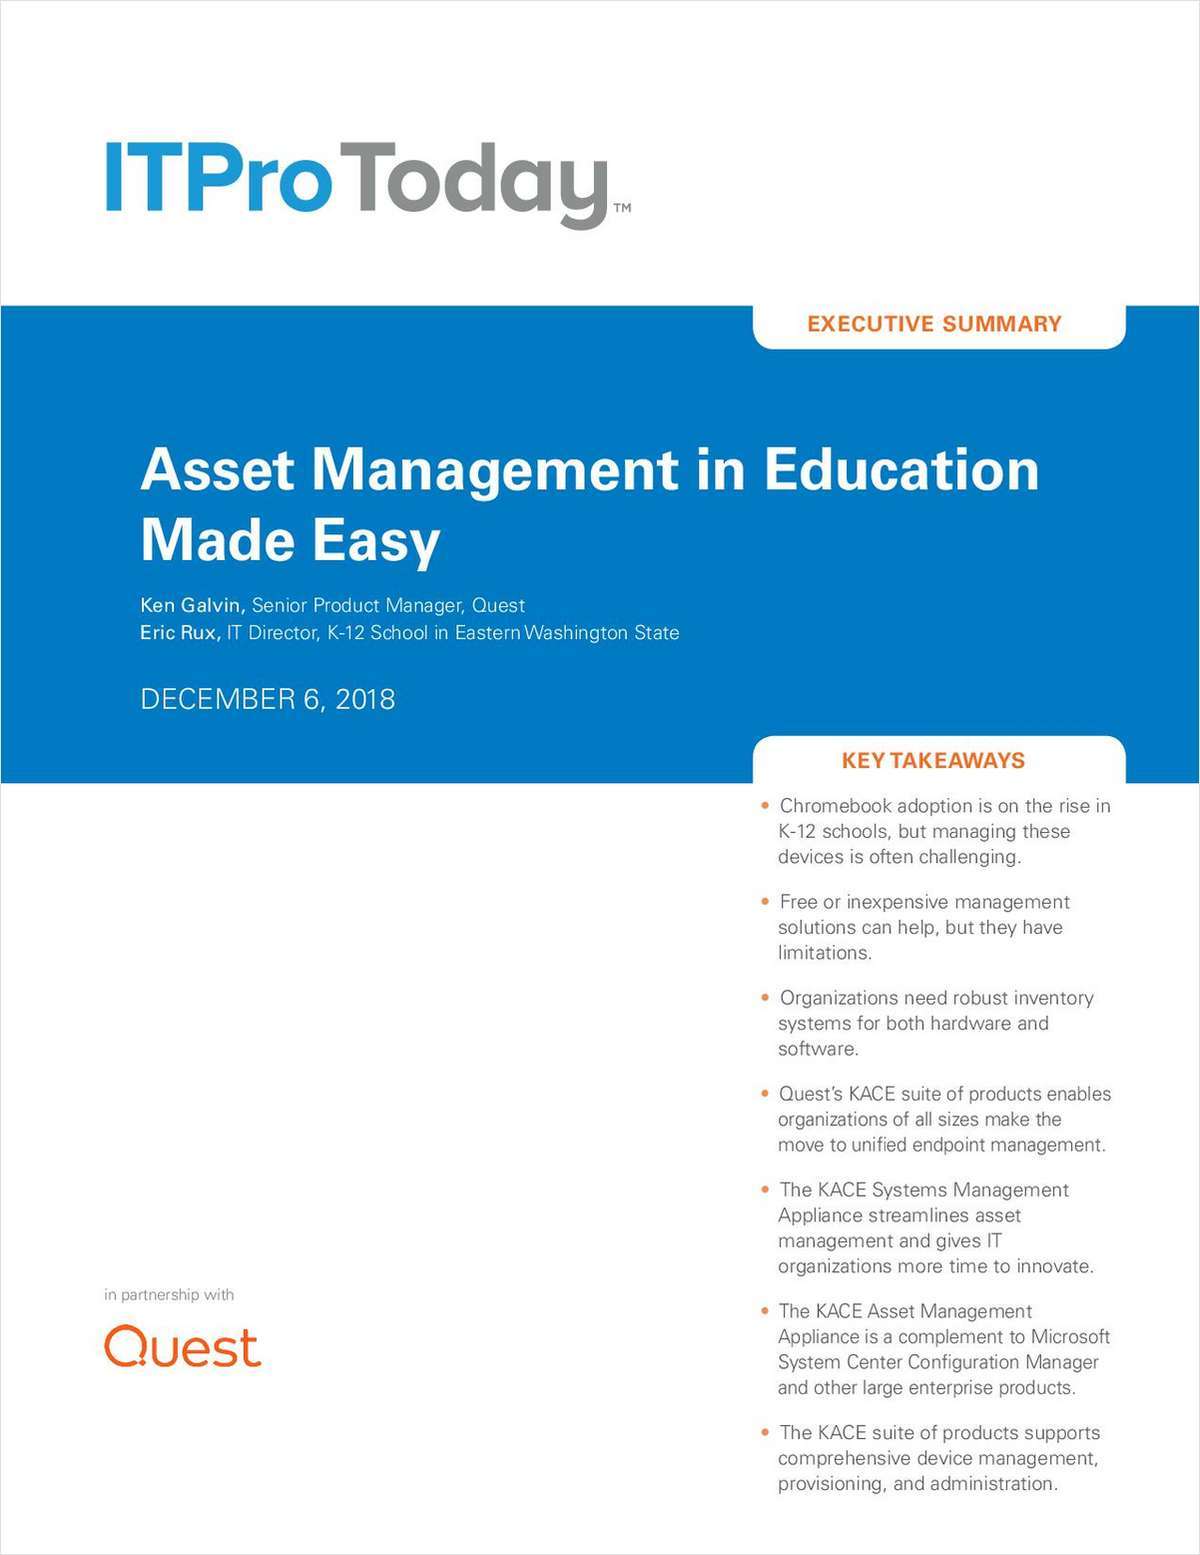 Whitepaper: Asset Management in Education Made Easy